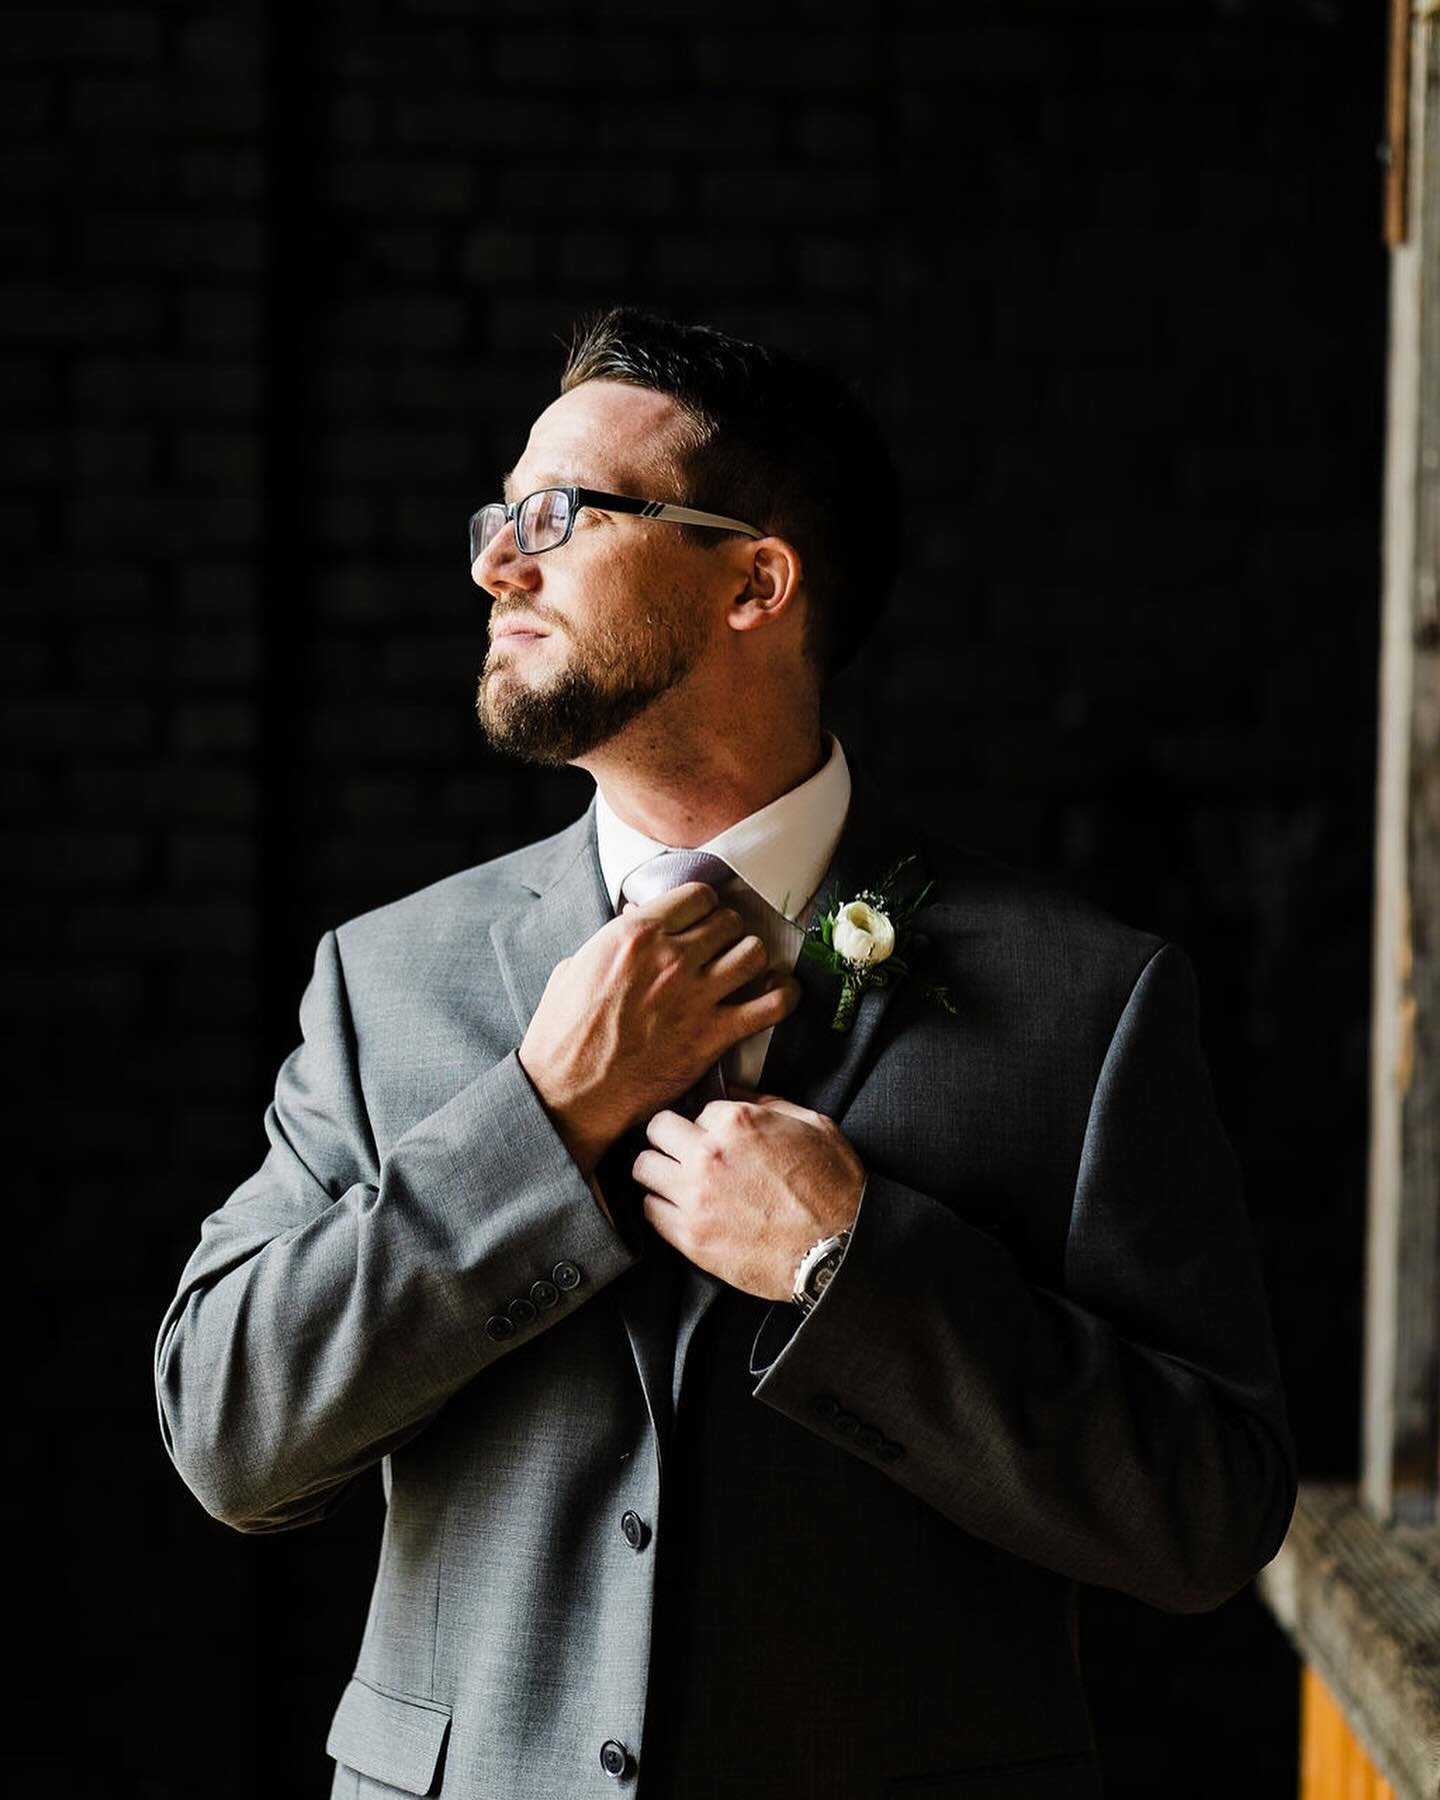 Every groom deserves his moment to shine... especially Daniel!

Photographer | @authormade
Venue | @northernpacificevents @thenorthernpacificcenter